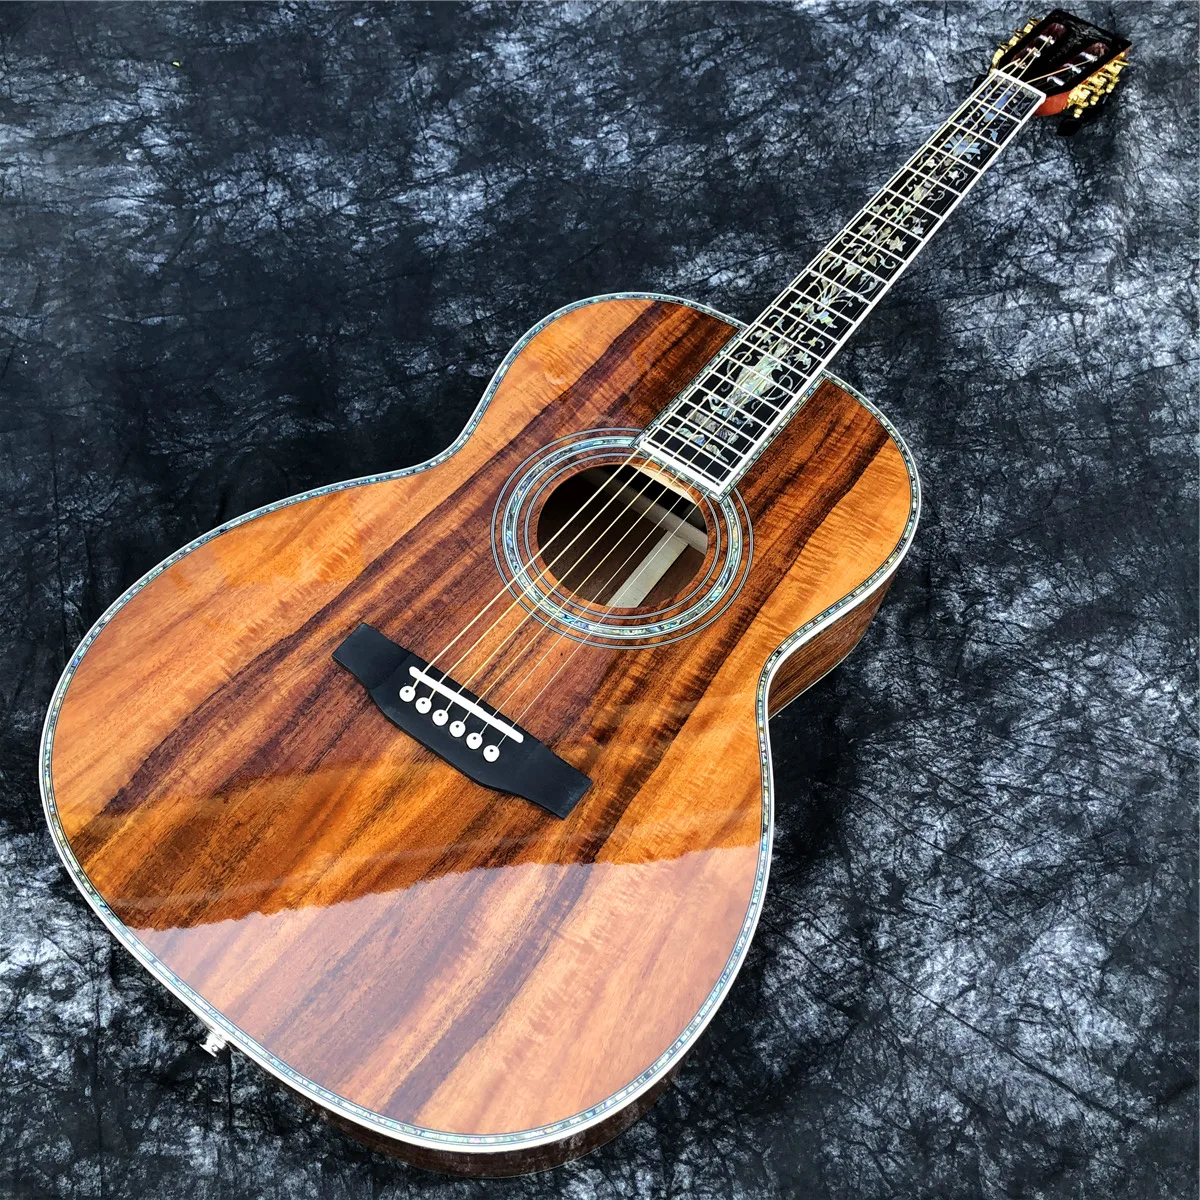 

39 Inches All Koa Wood OOO Type Acoustic Guitar Real Abalone Inlays Ebony Fingerboard Electric Guitar